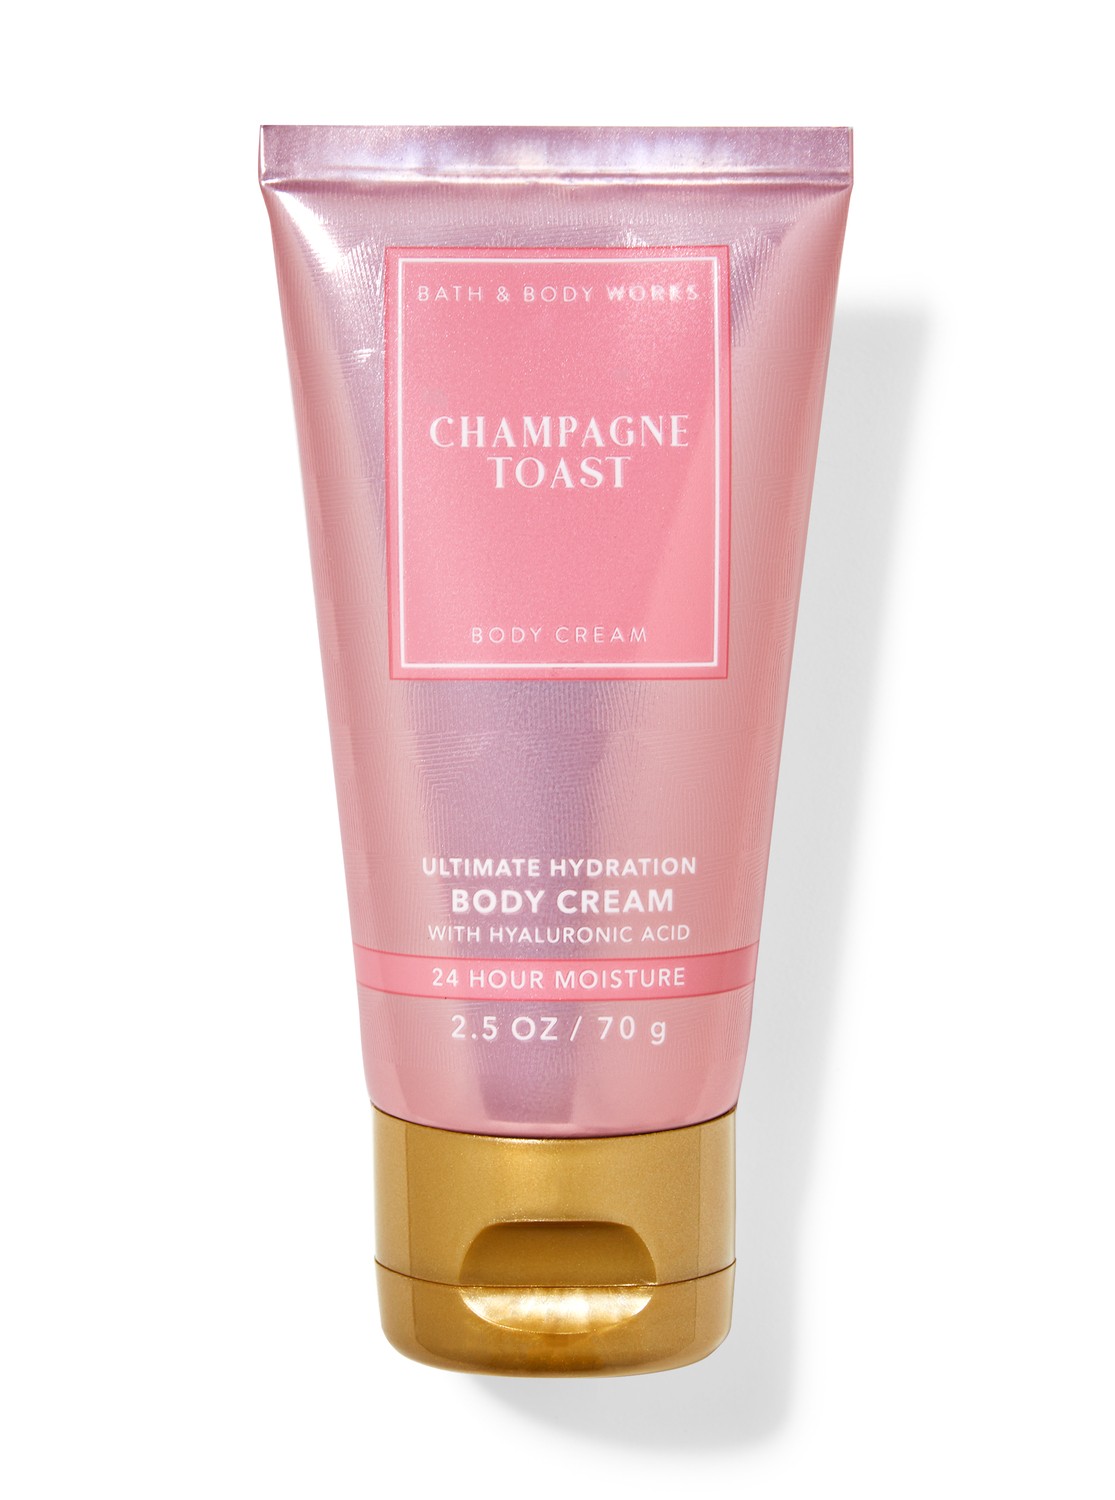 Buy Champagne Toast Online | Bath & Body Works Malaysia Official Site